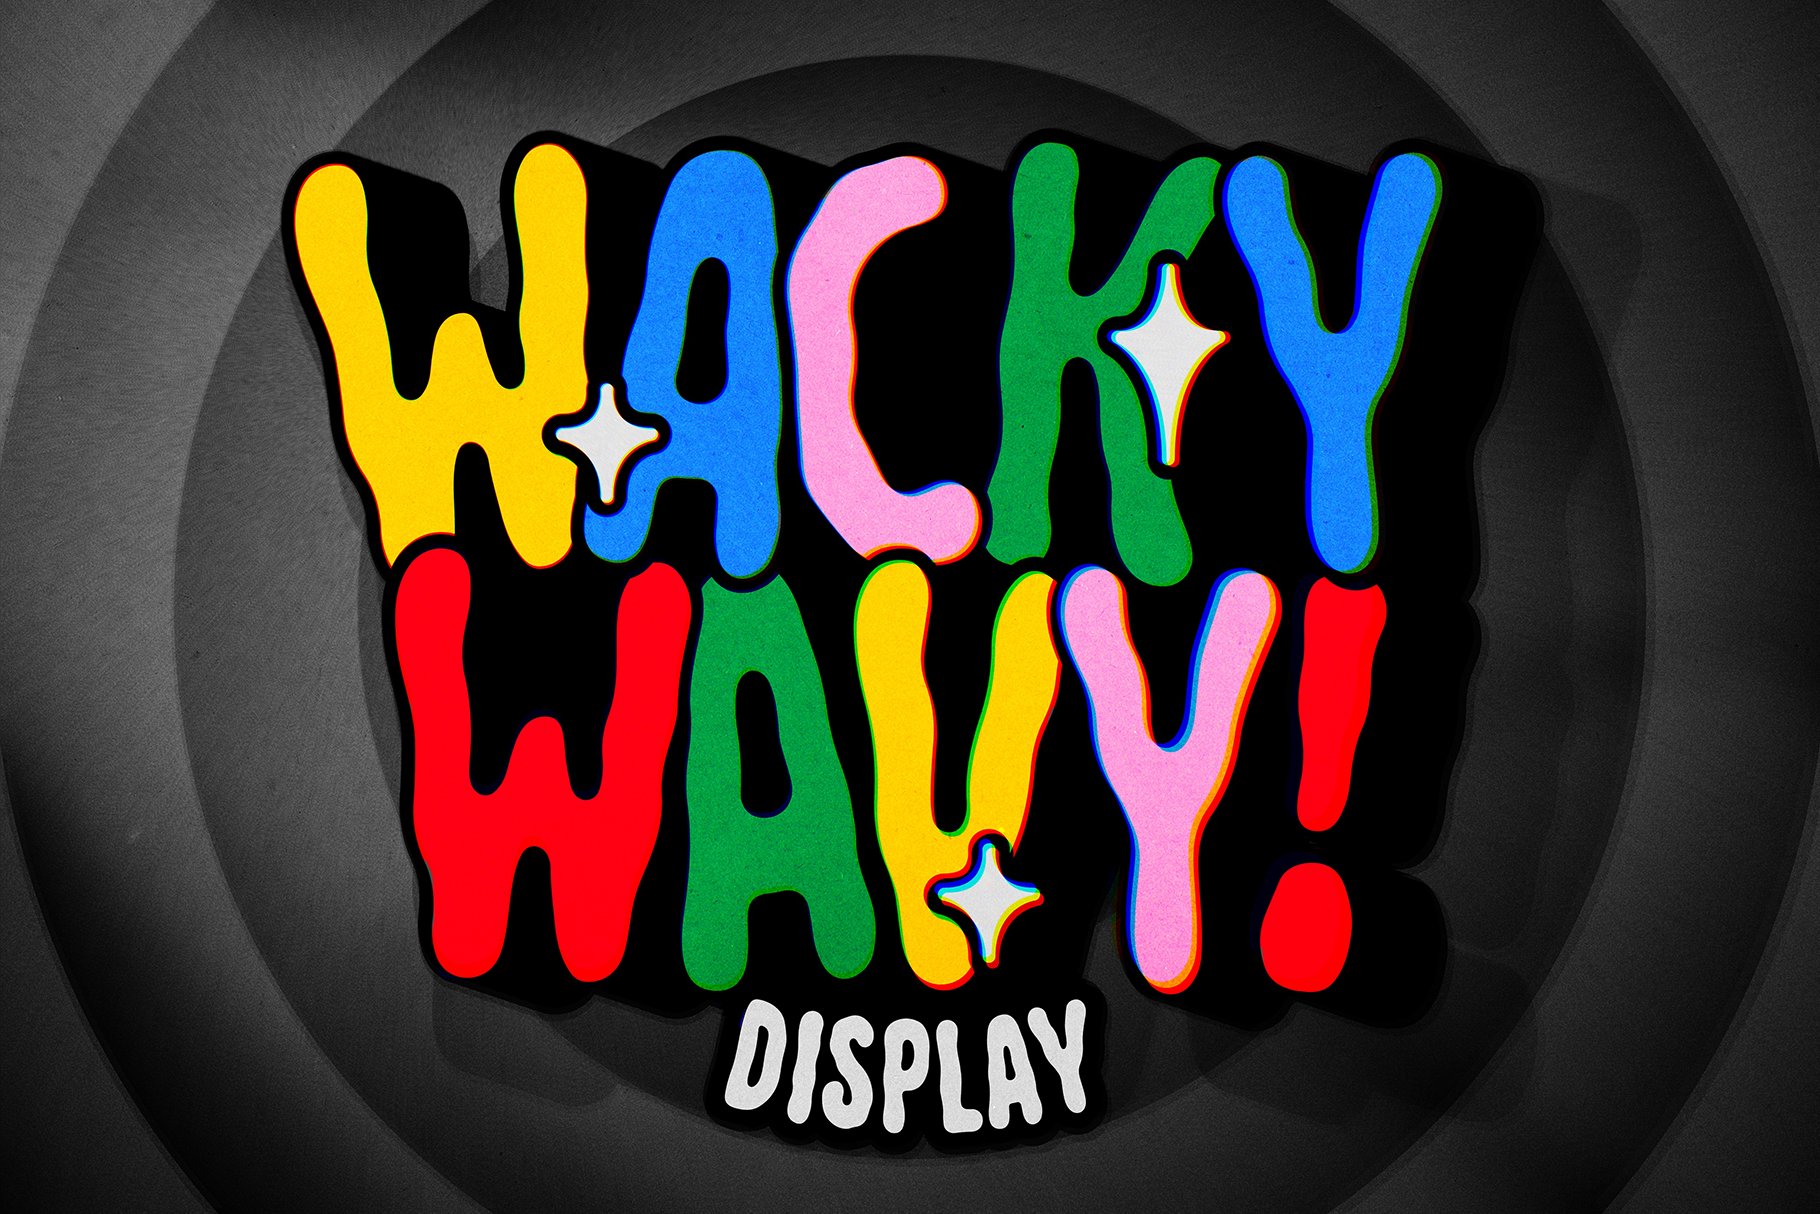 Wacky Wavy! A Wiggly Display Font cover image.